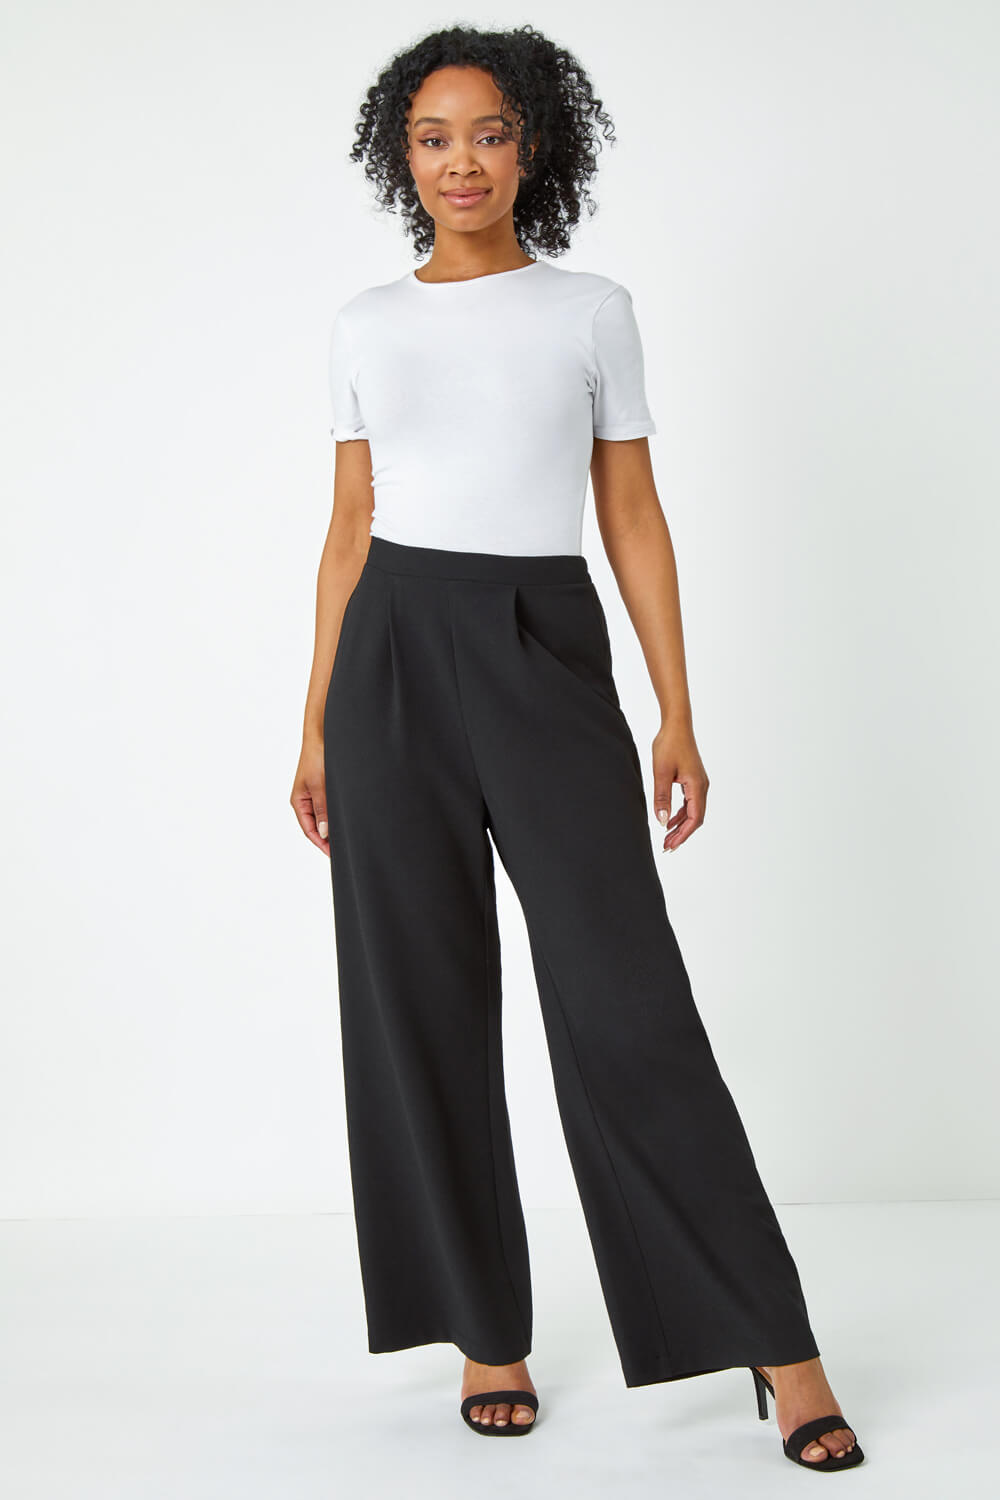 Black Petite Wide Leg Stretch Trousers, Image 4 of 5